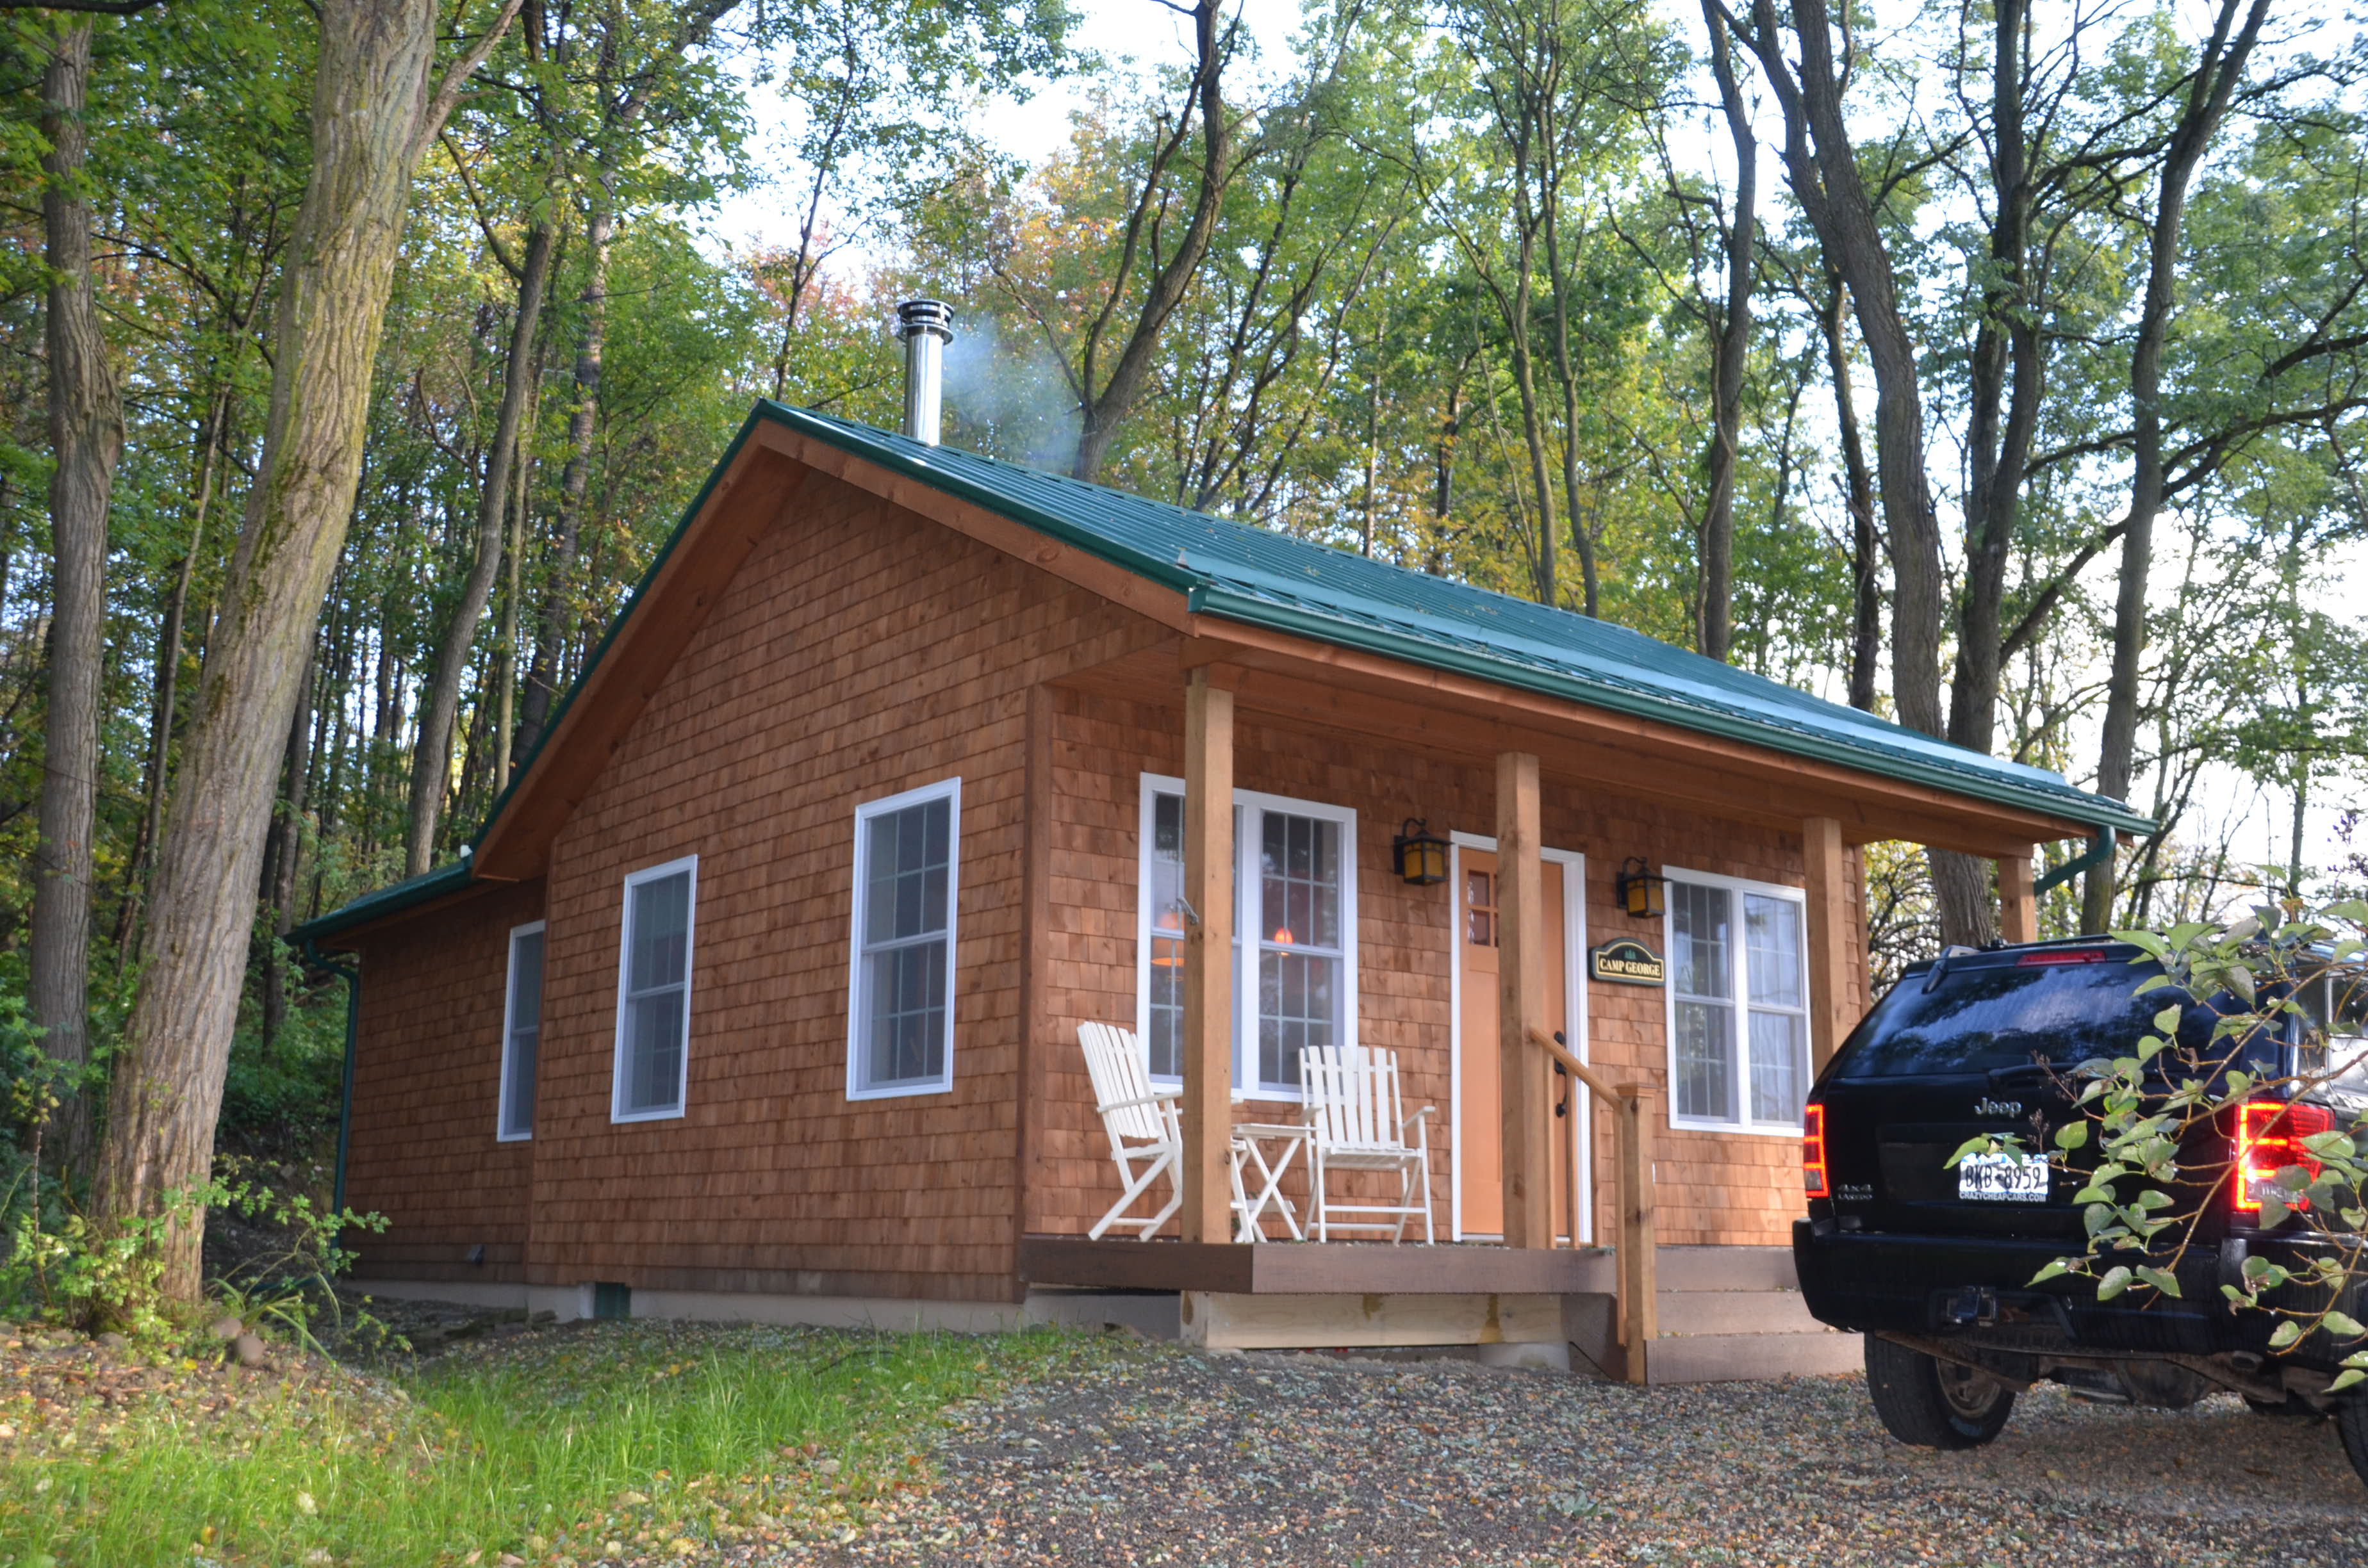 Camp George - 525 sq .ft. with porch and back patio